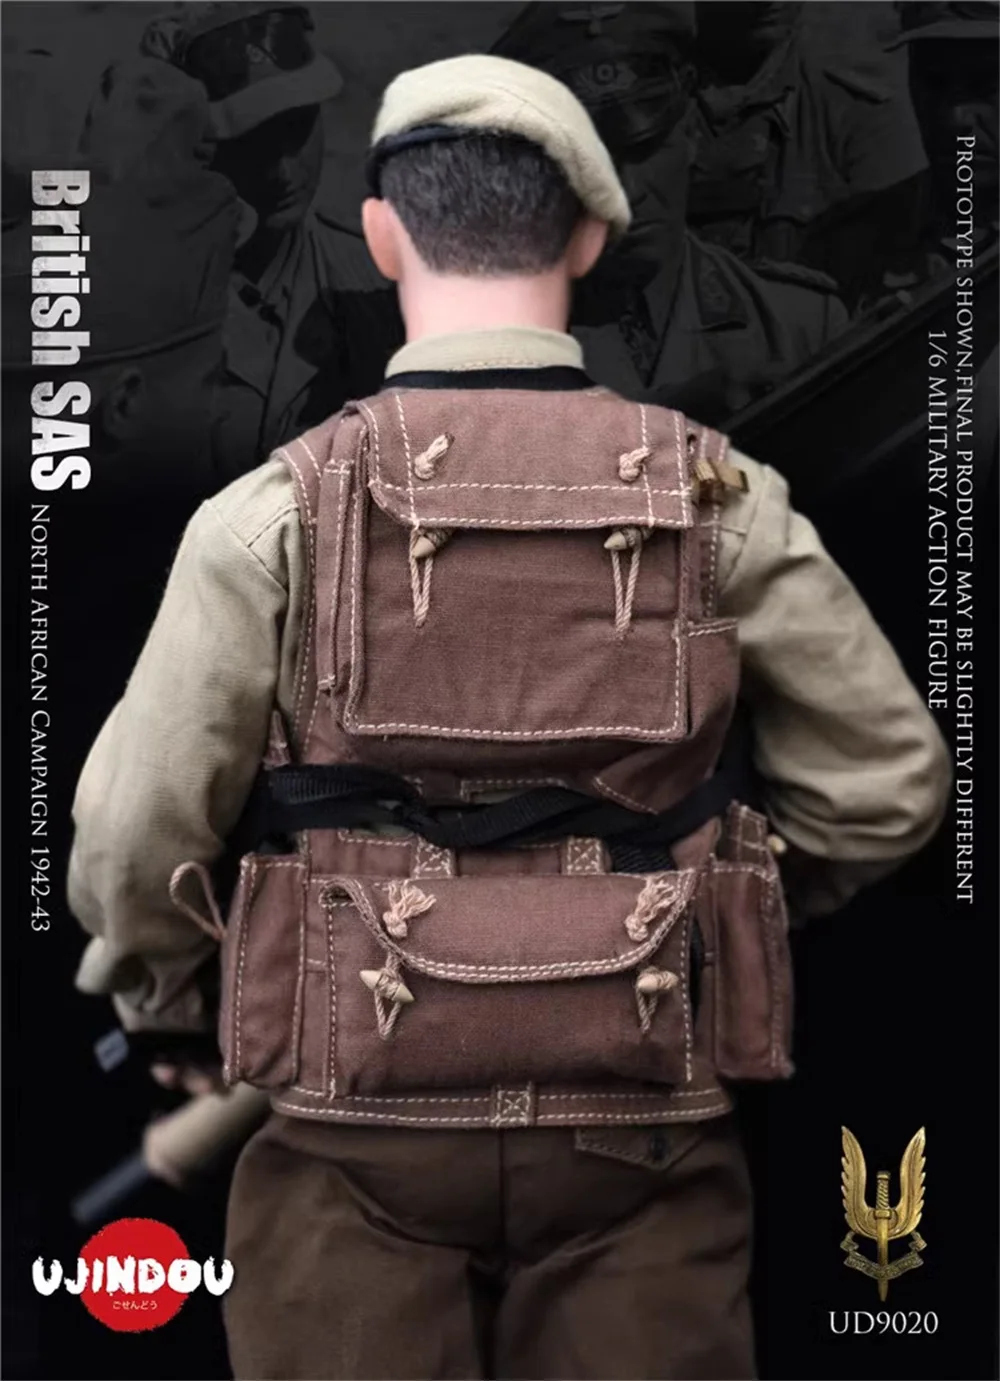 

1/6 UJINDOU UD9020 WWII The British Soldier North African Campaign 1942-1943 Hang Chest Vest Bags Shirt 12" Doll Scene Component